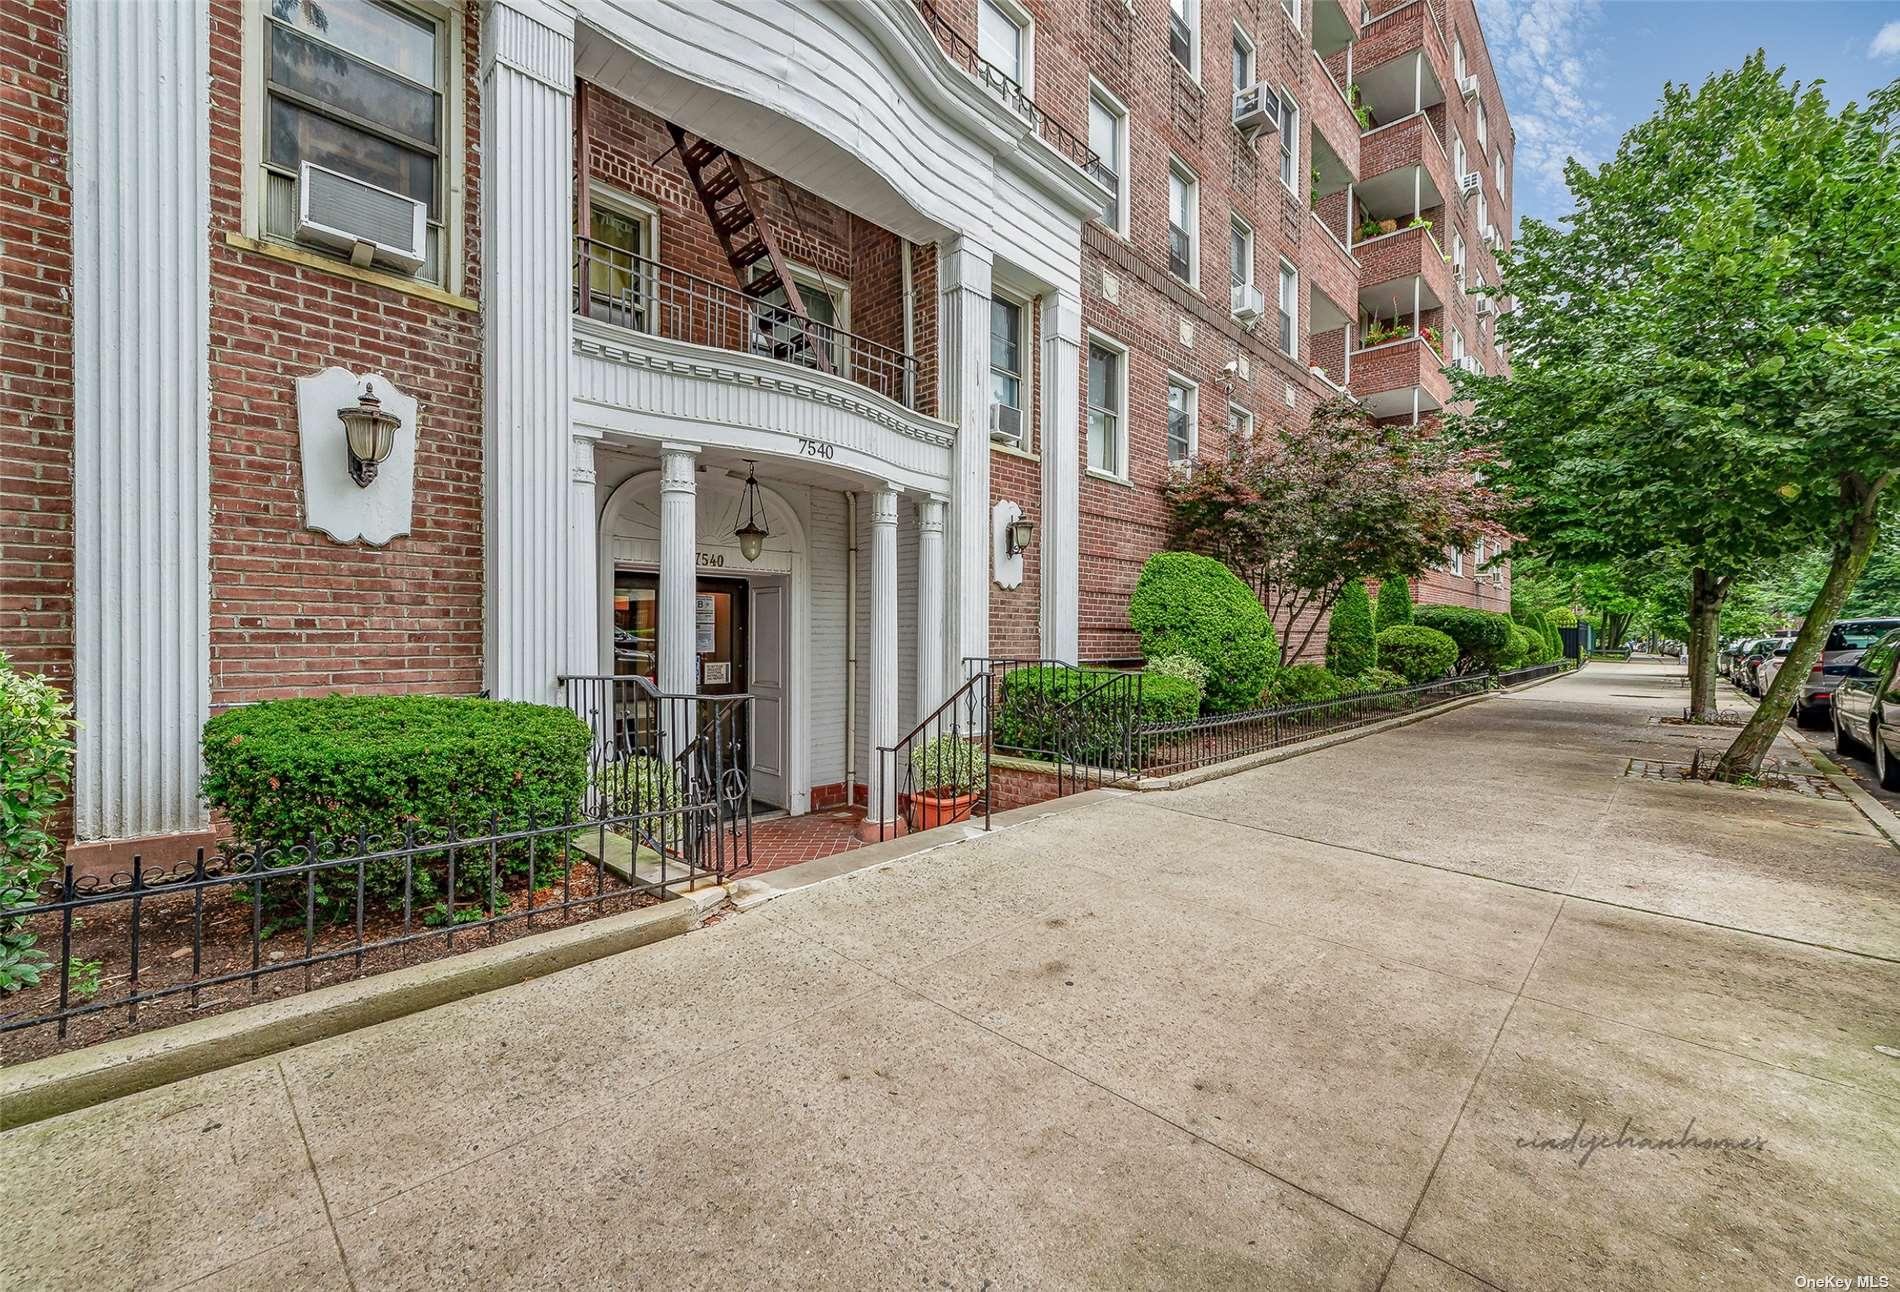 75-40 Austin Street #4GR in Queens, Forest Hills, NY 11375